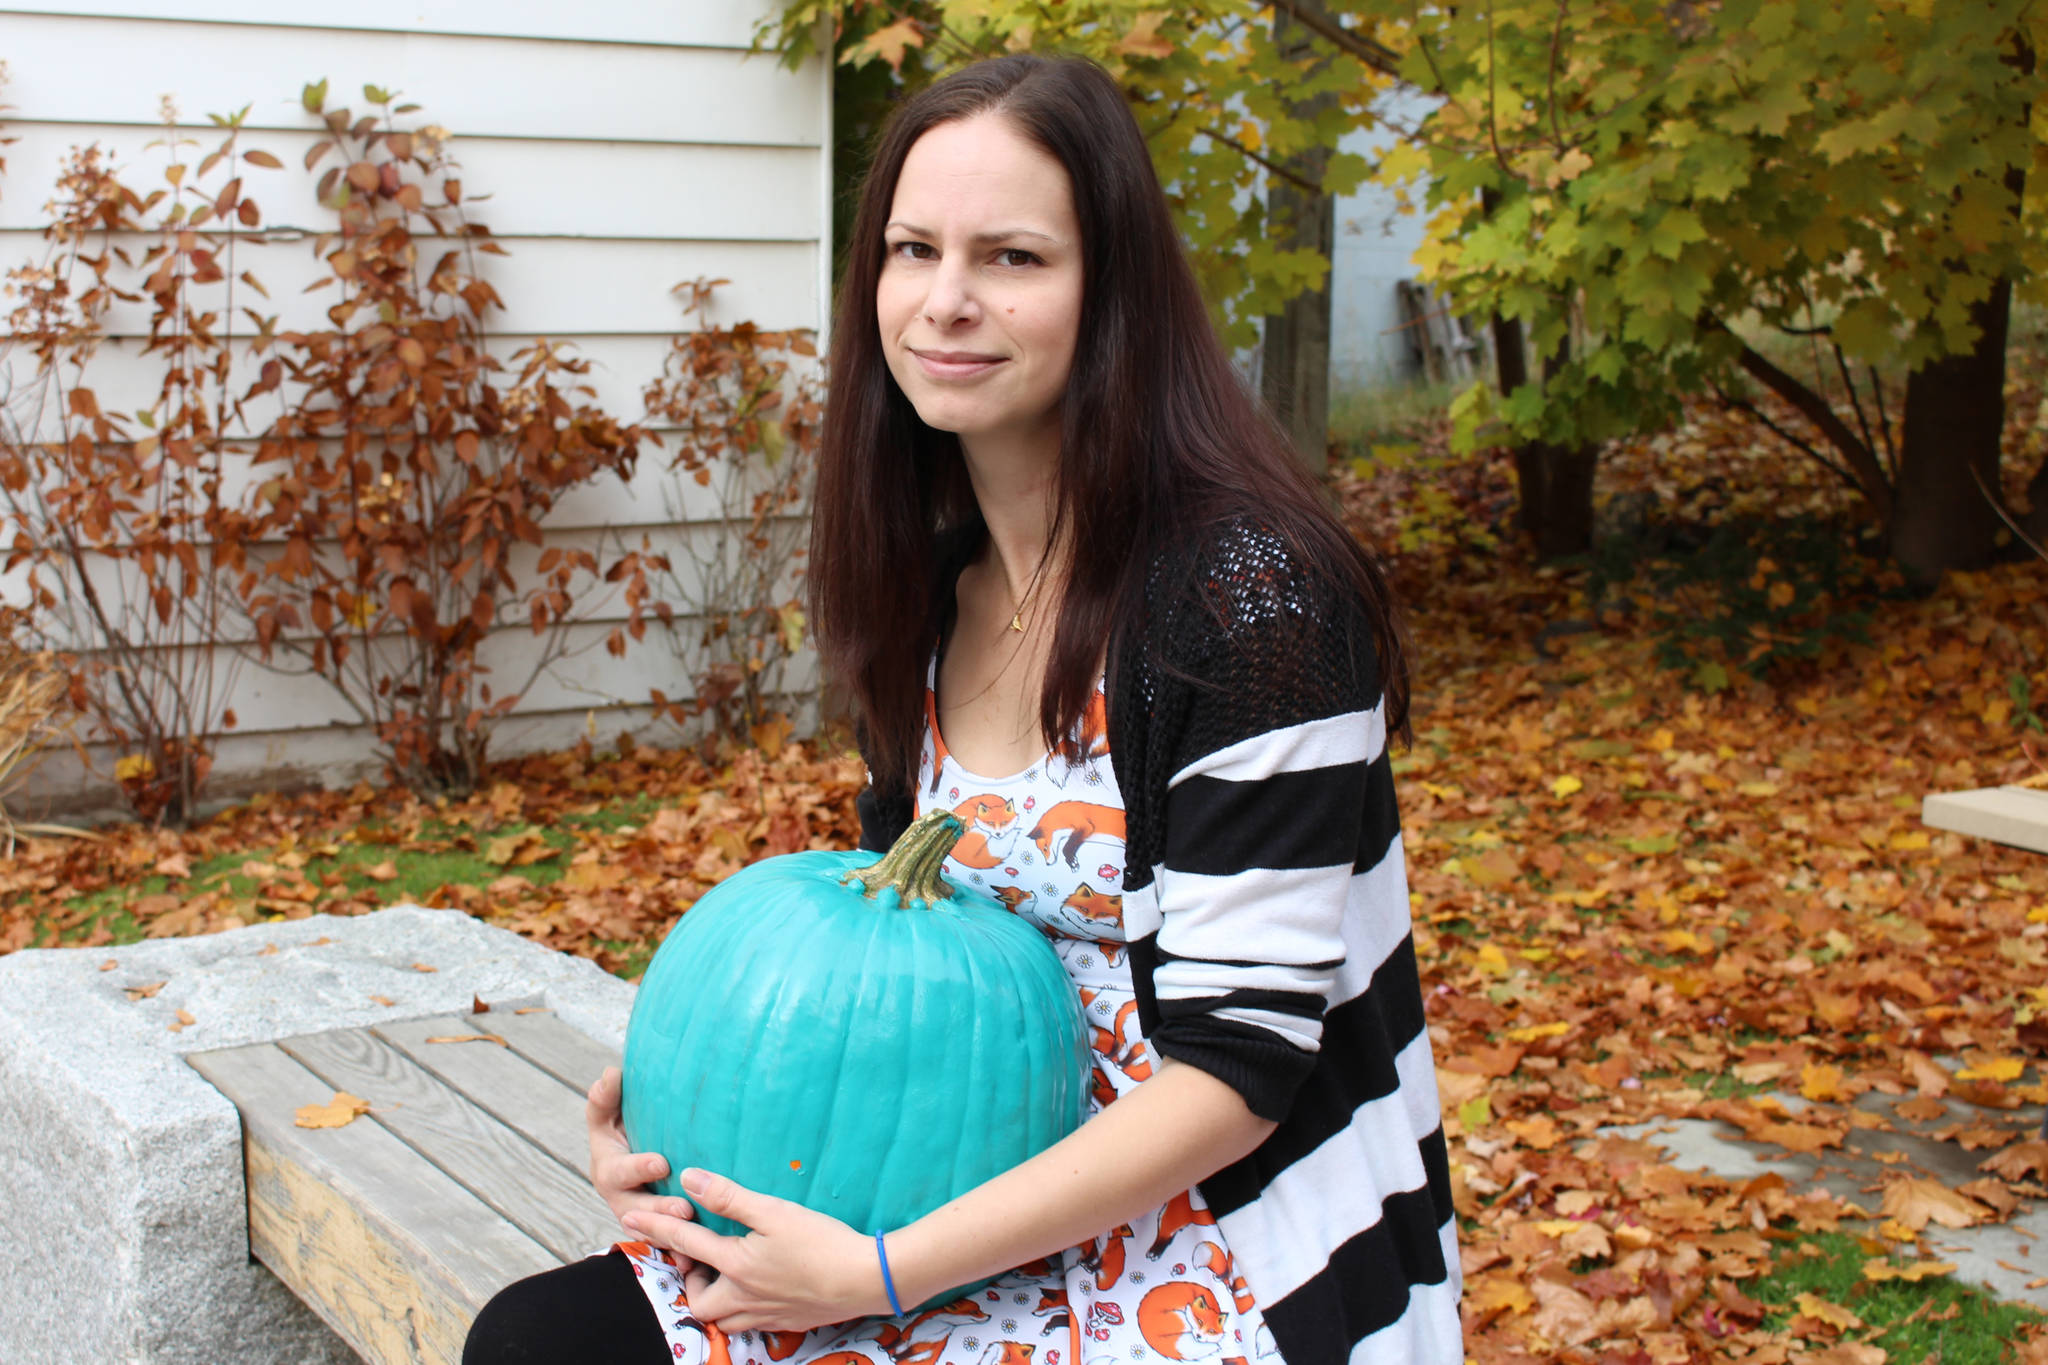 Canadian woman launches campaign for trick-or-treaters who can’t eat candy